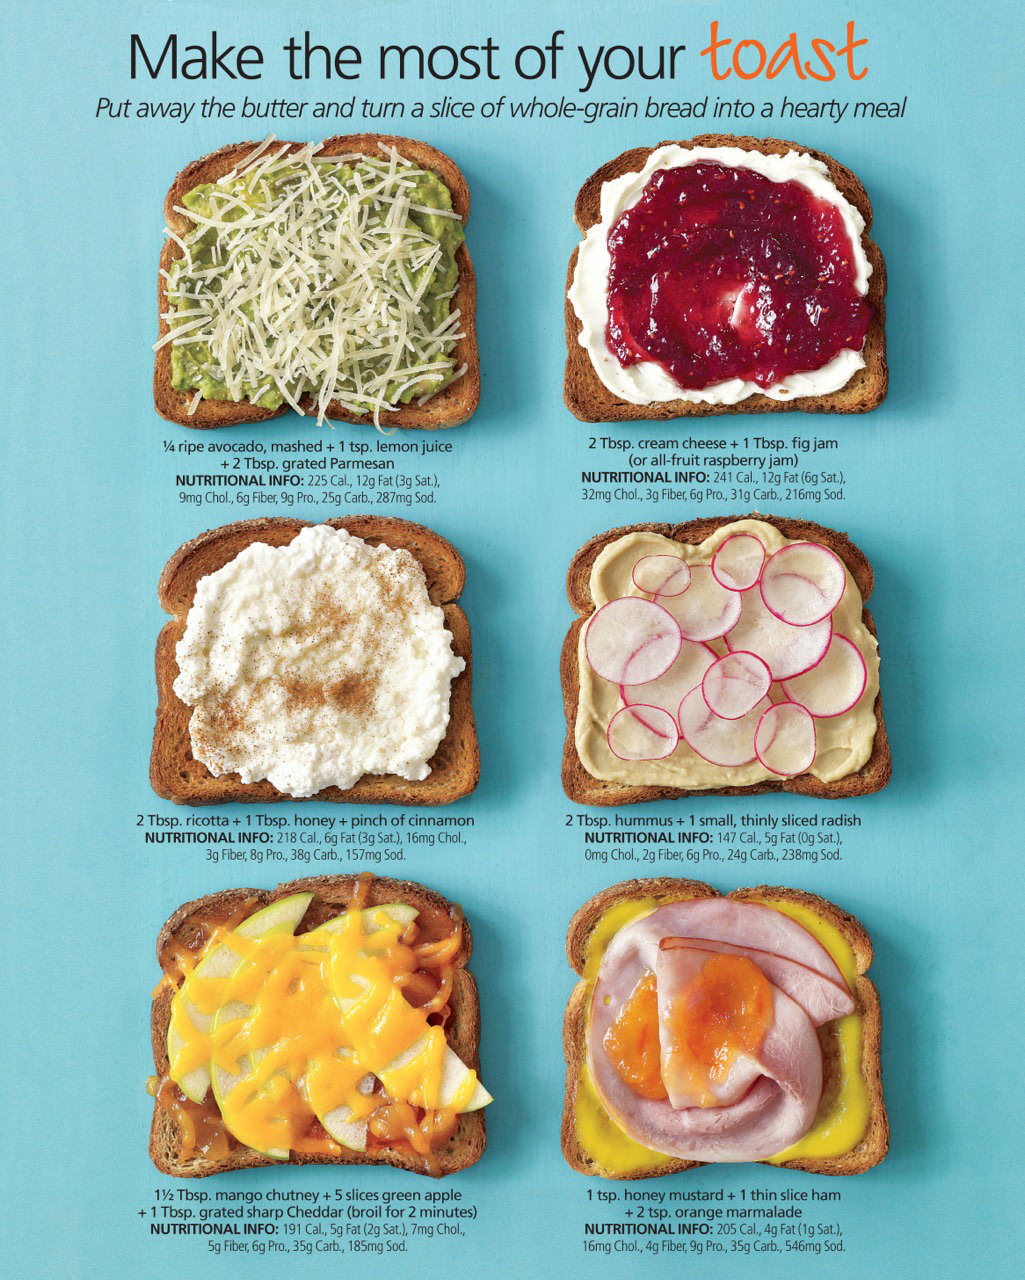 Fitness Stuff #391: Make the most of your toast